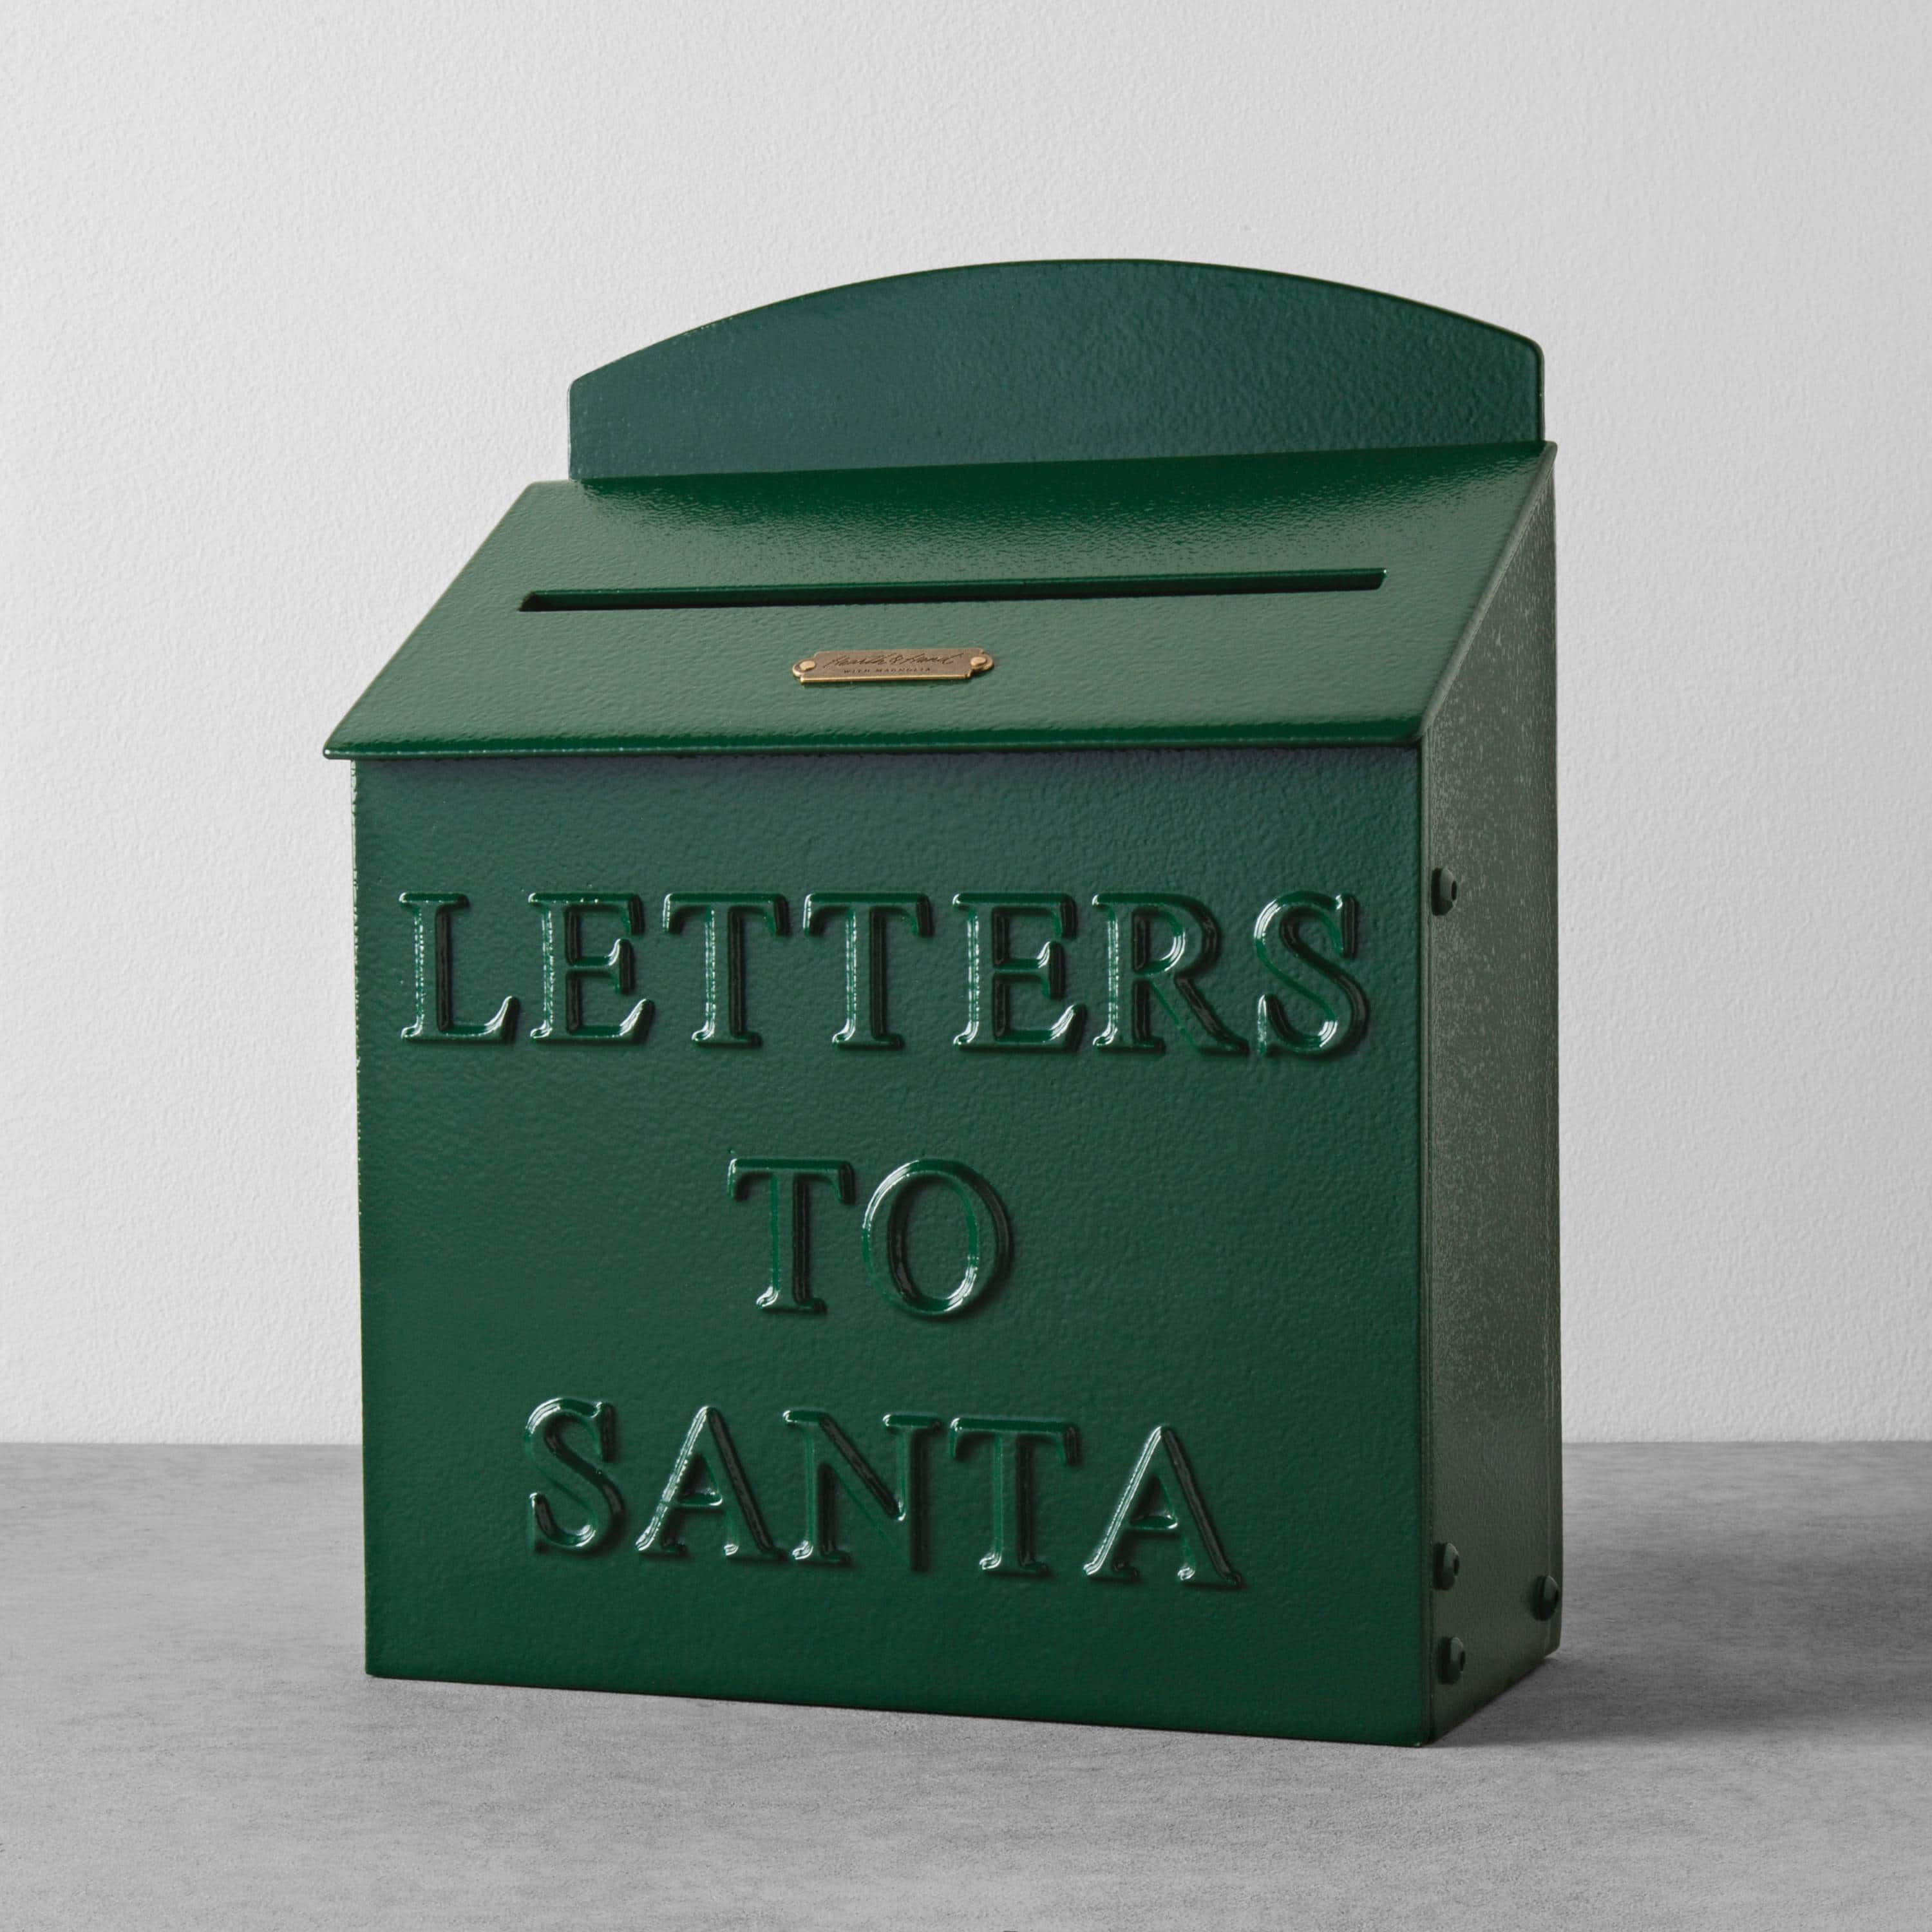 Letters to Santa green mailbox.